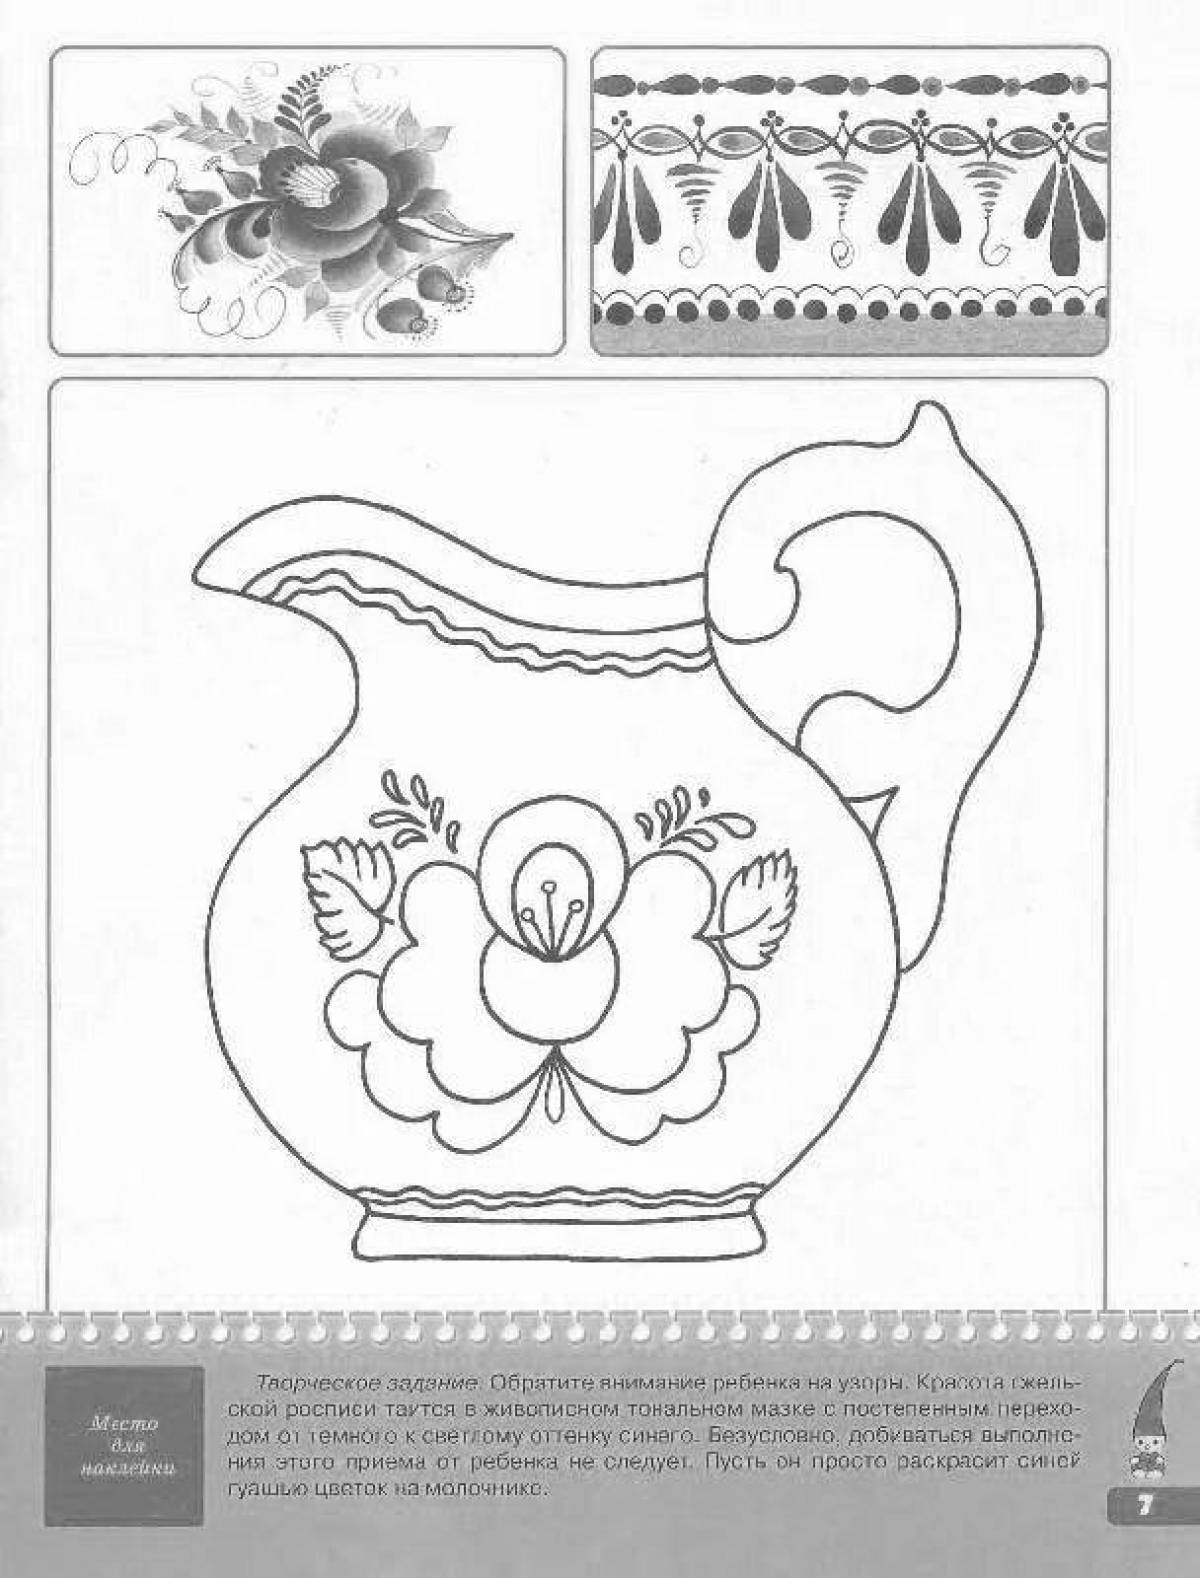 Coloring book decorated Gzhel vase